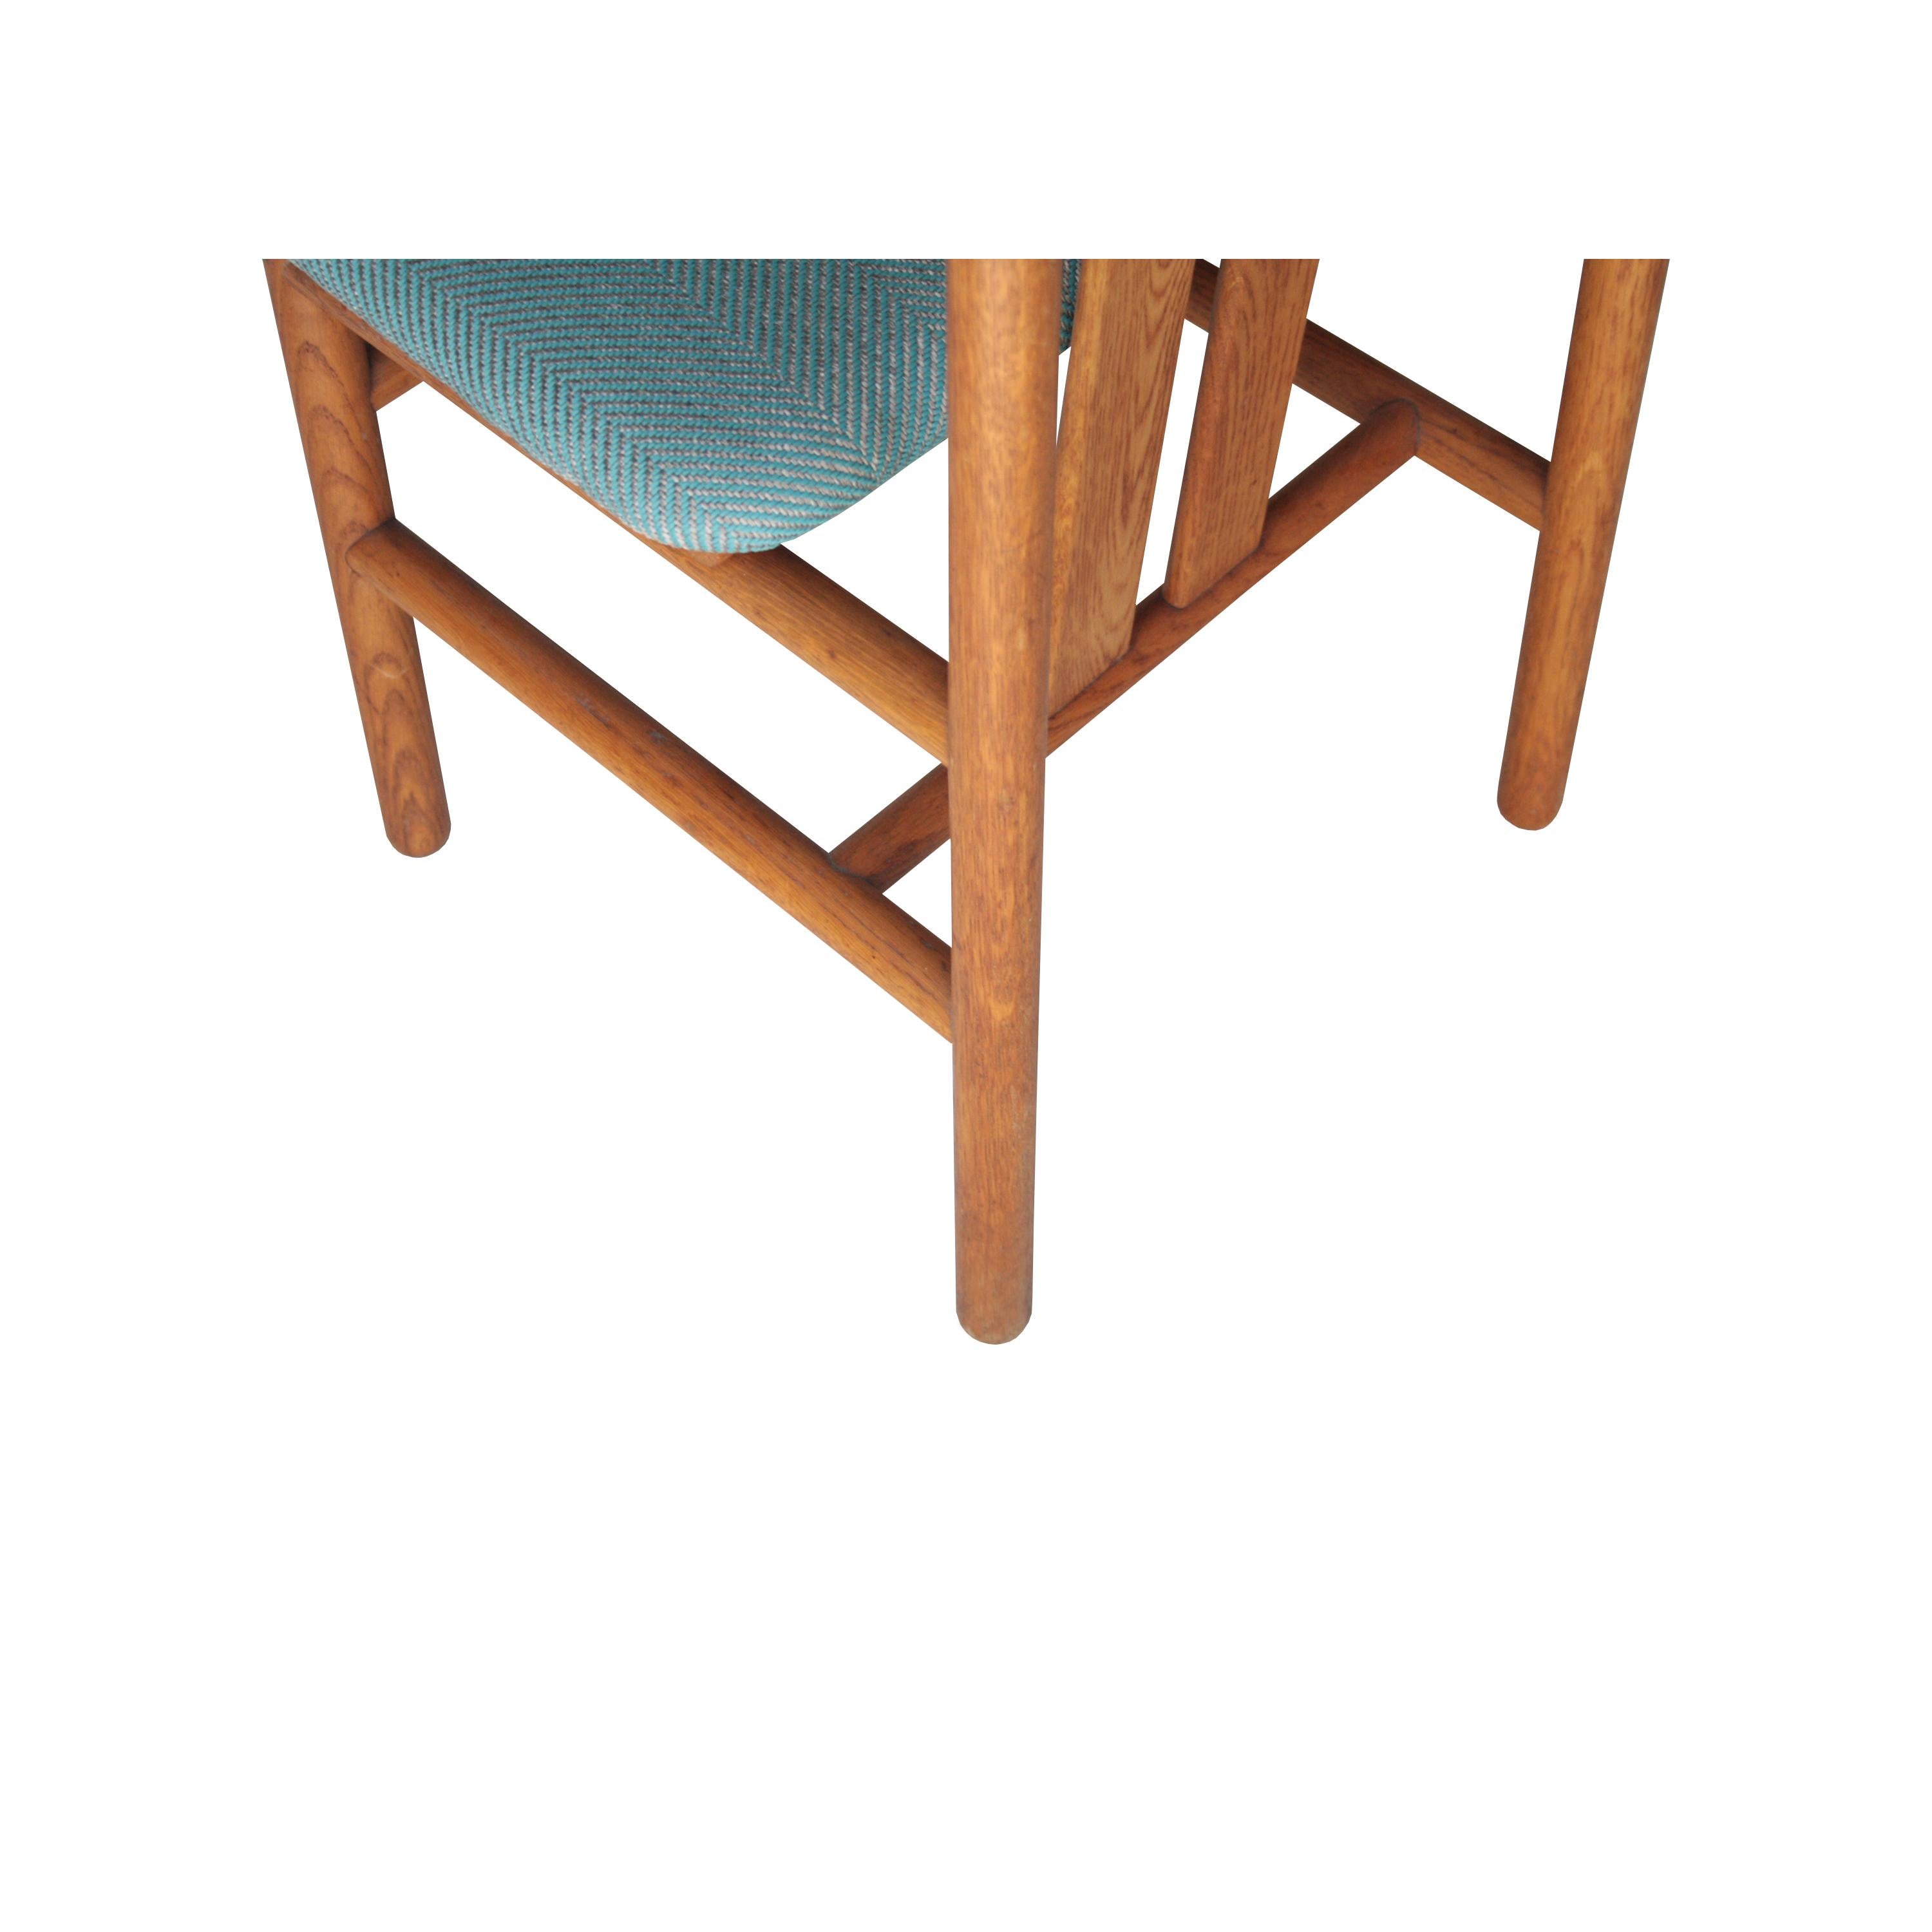 Mid-20th Century Set of Six Chairs Made of Teak with Upholstered Seat, Italy, 1960